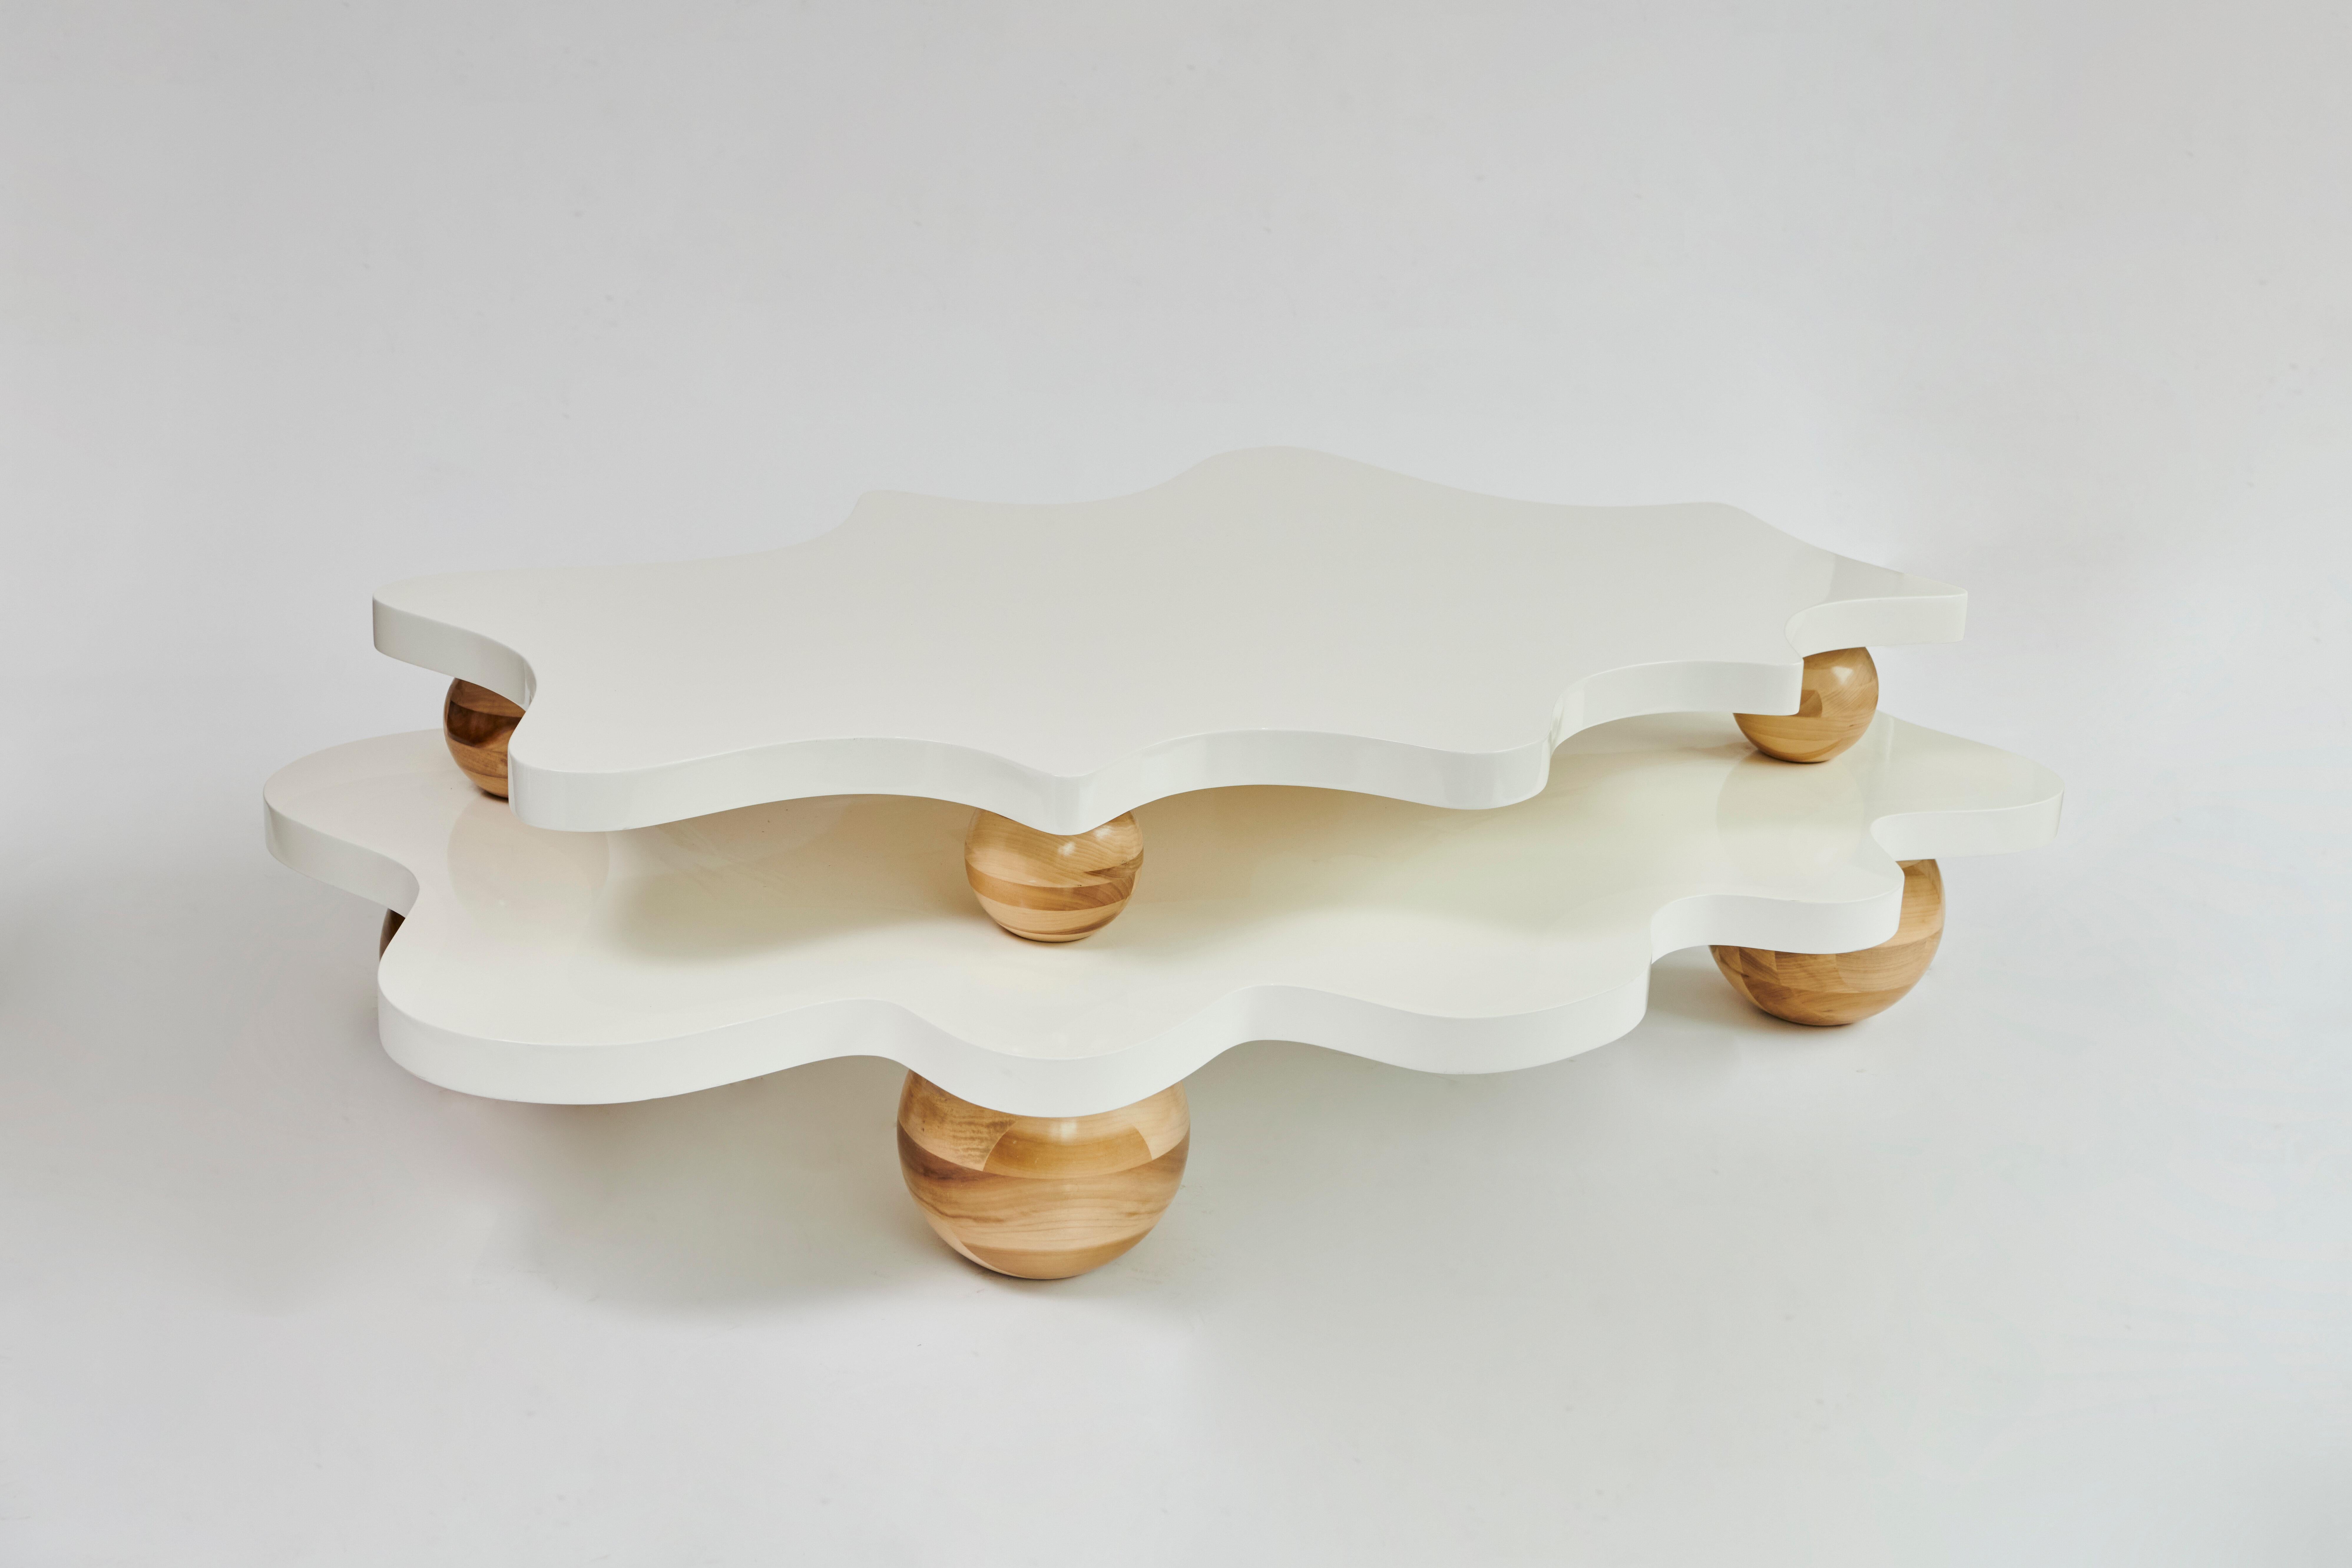 Made to order two-layer coffee table designed by Christian Siriano.

Material: White lacquer top with natural maple legs  (available in custom finish)

Dimensions

Bottom Layer:
Overall Width: 69”
Overall Depth: 51” 

Top Layer:
Overall Width: